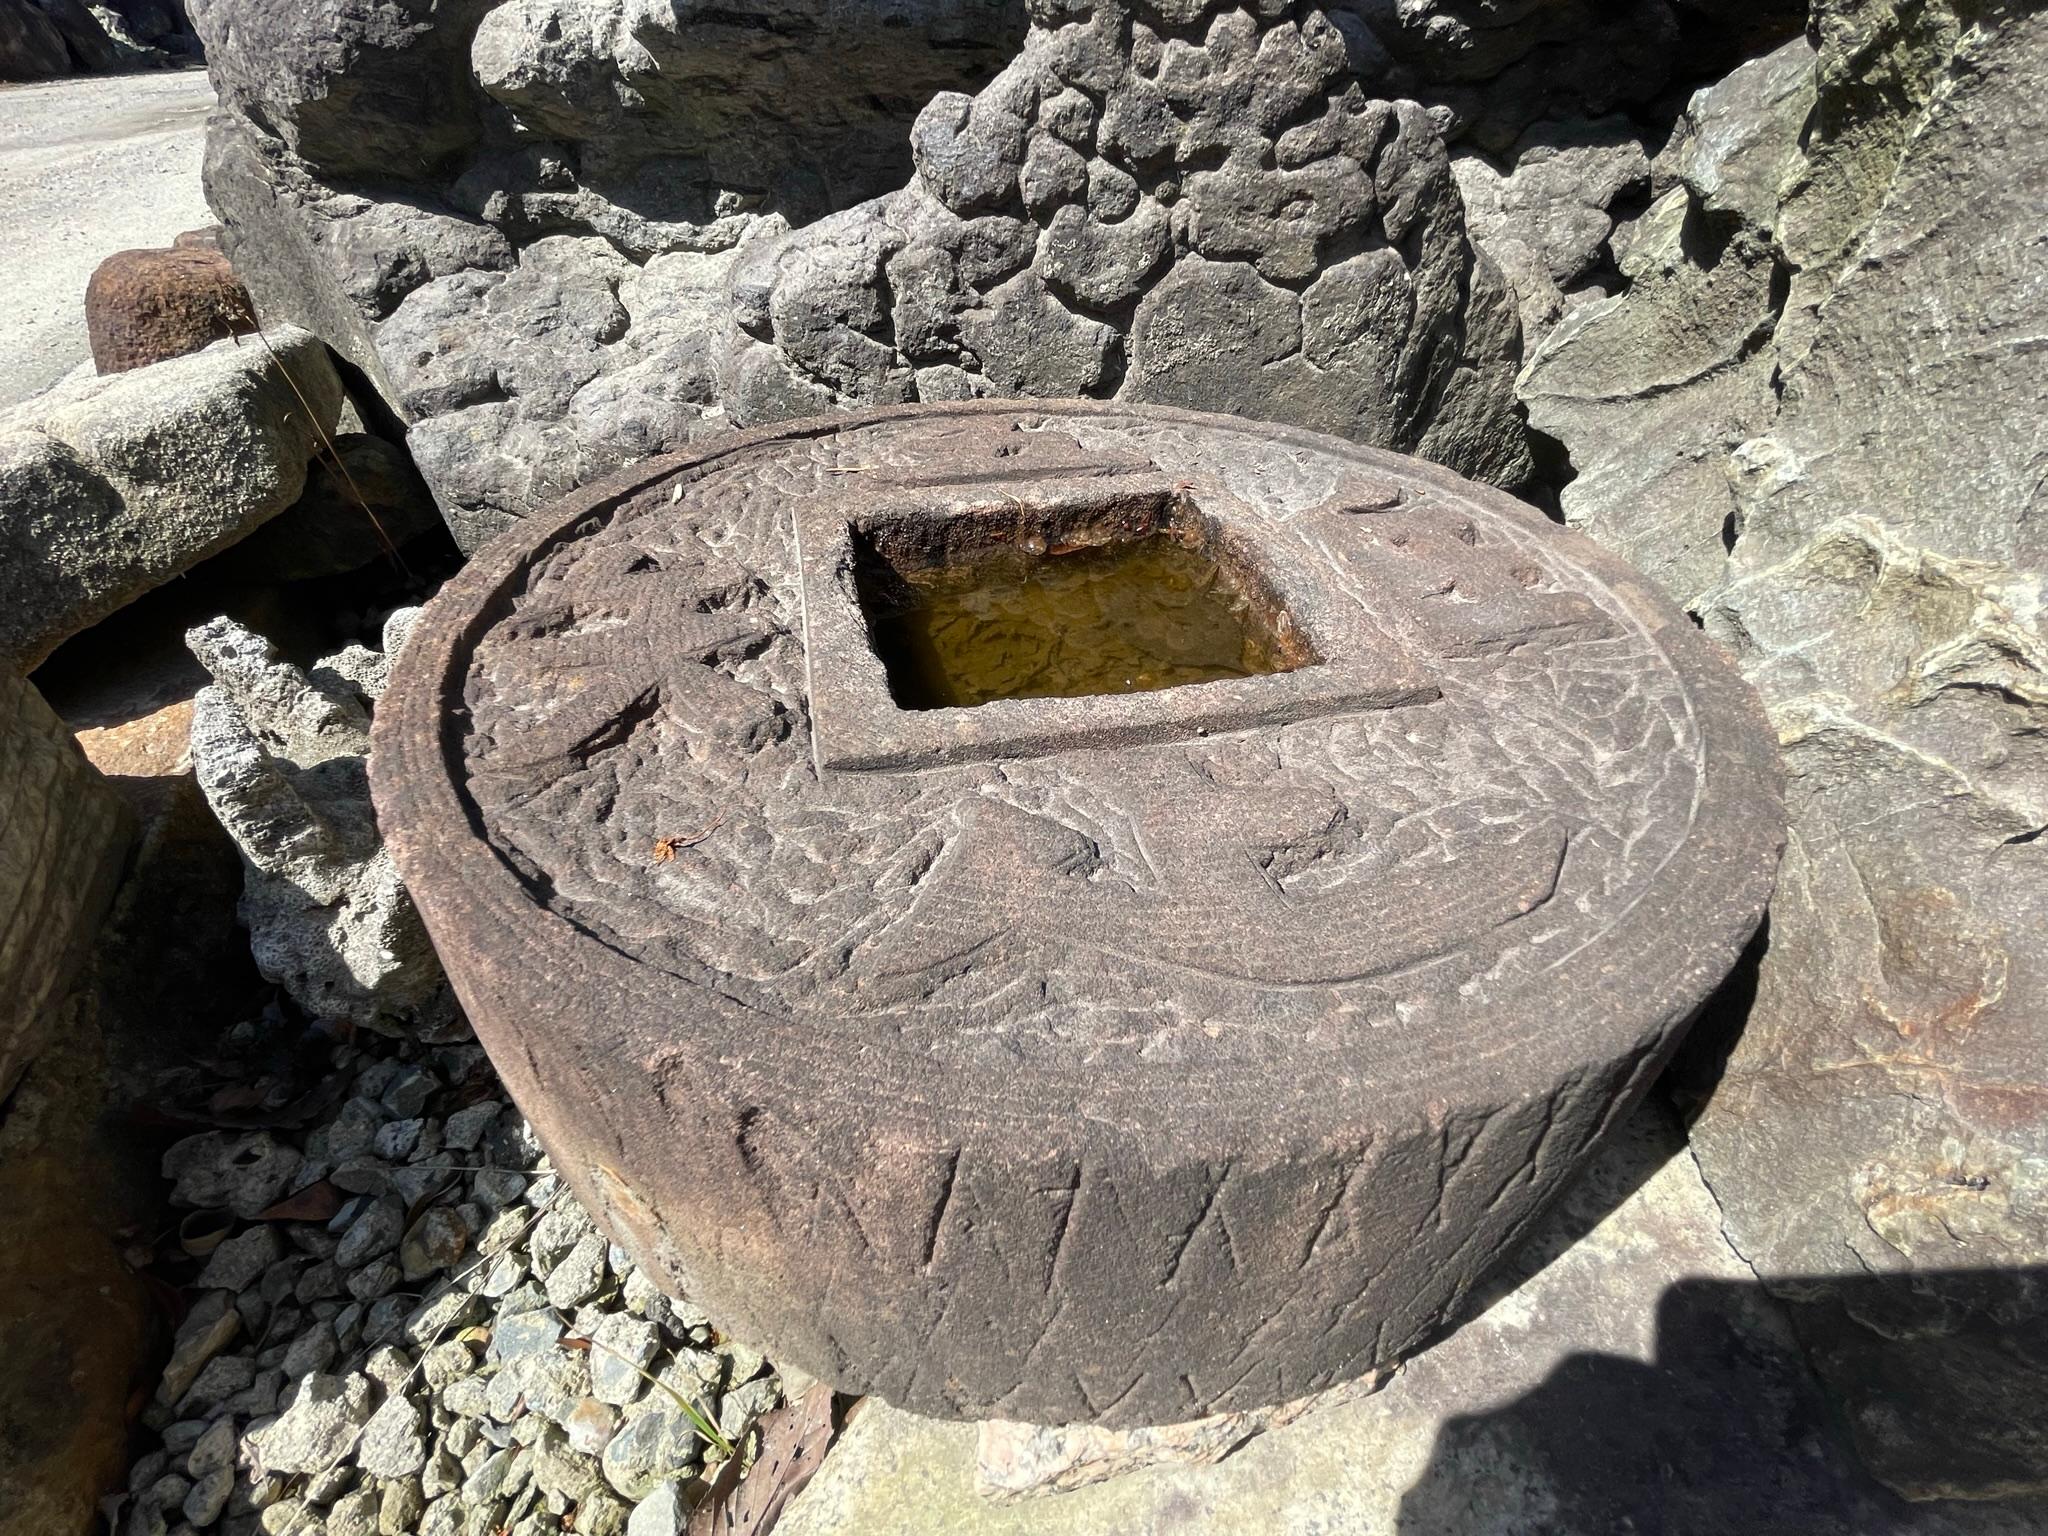 Unusual Controversial shape

Japan, a handsome and unique older round stone water basin tsukubai or planter in the form of Japanese coin with good luck and prosperity kanji inscribed on its top. It was sourced from a decades old Japanese